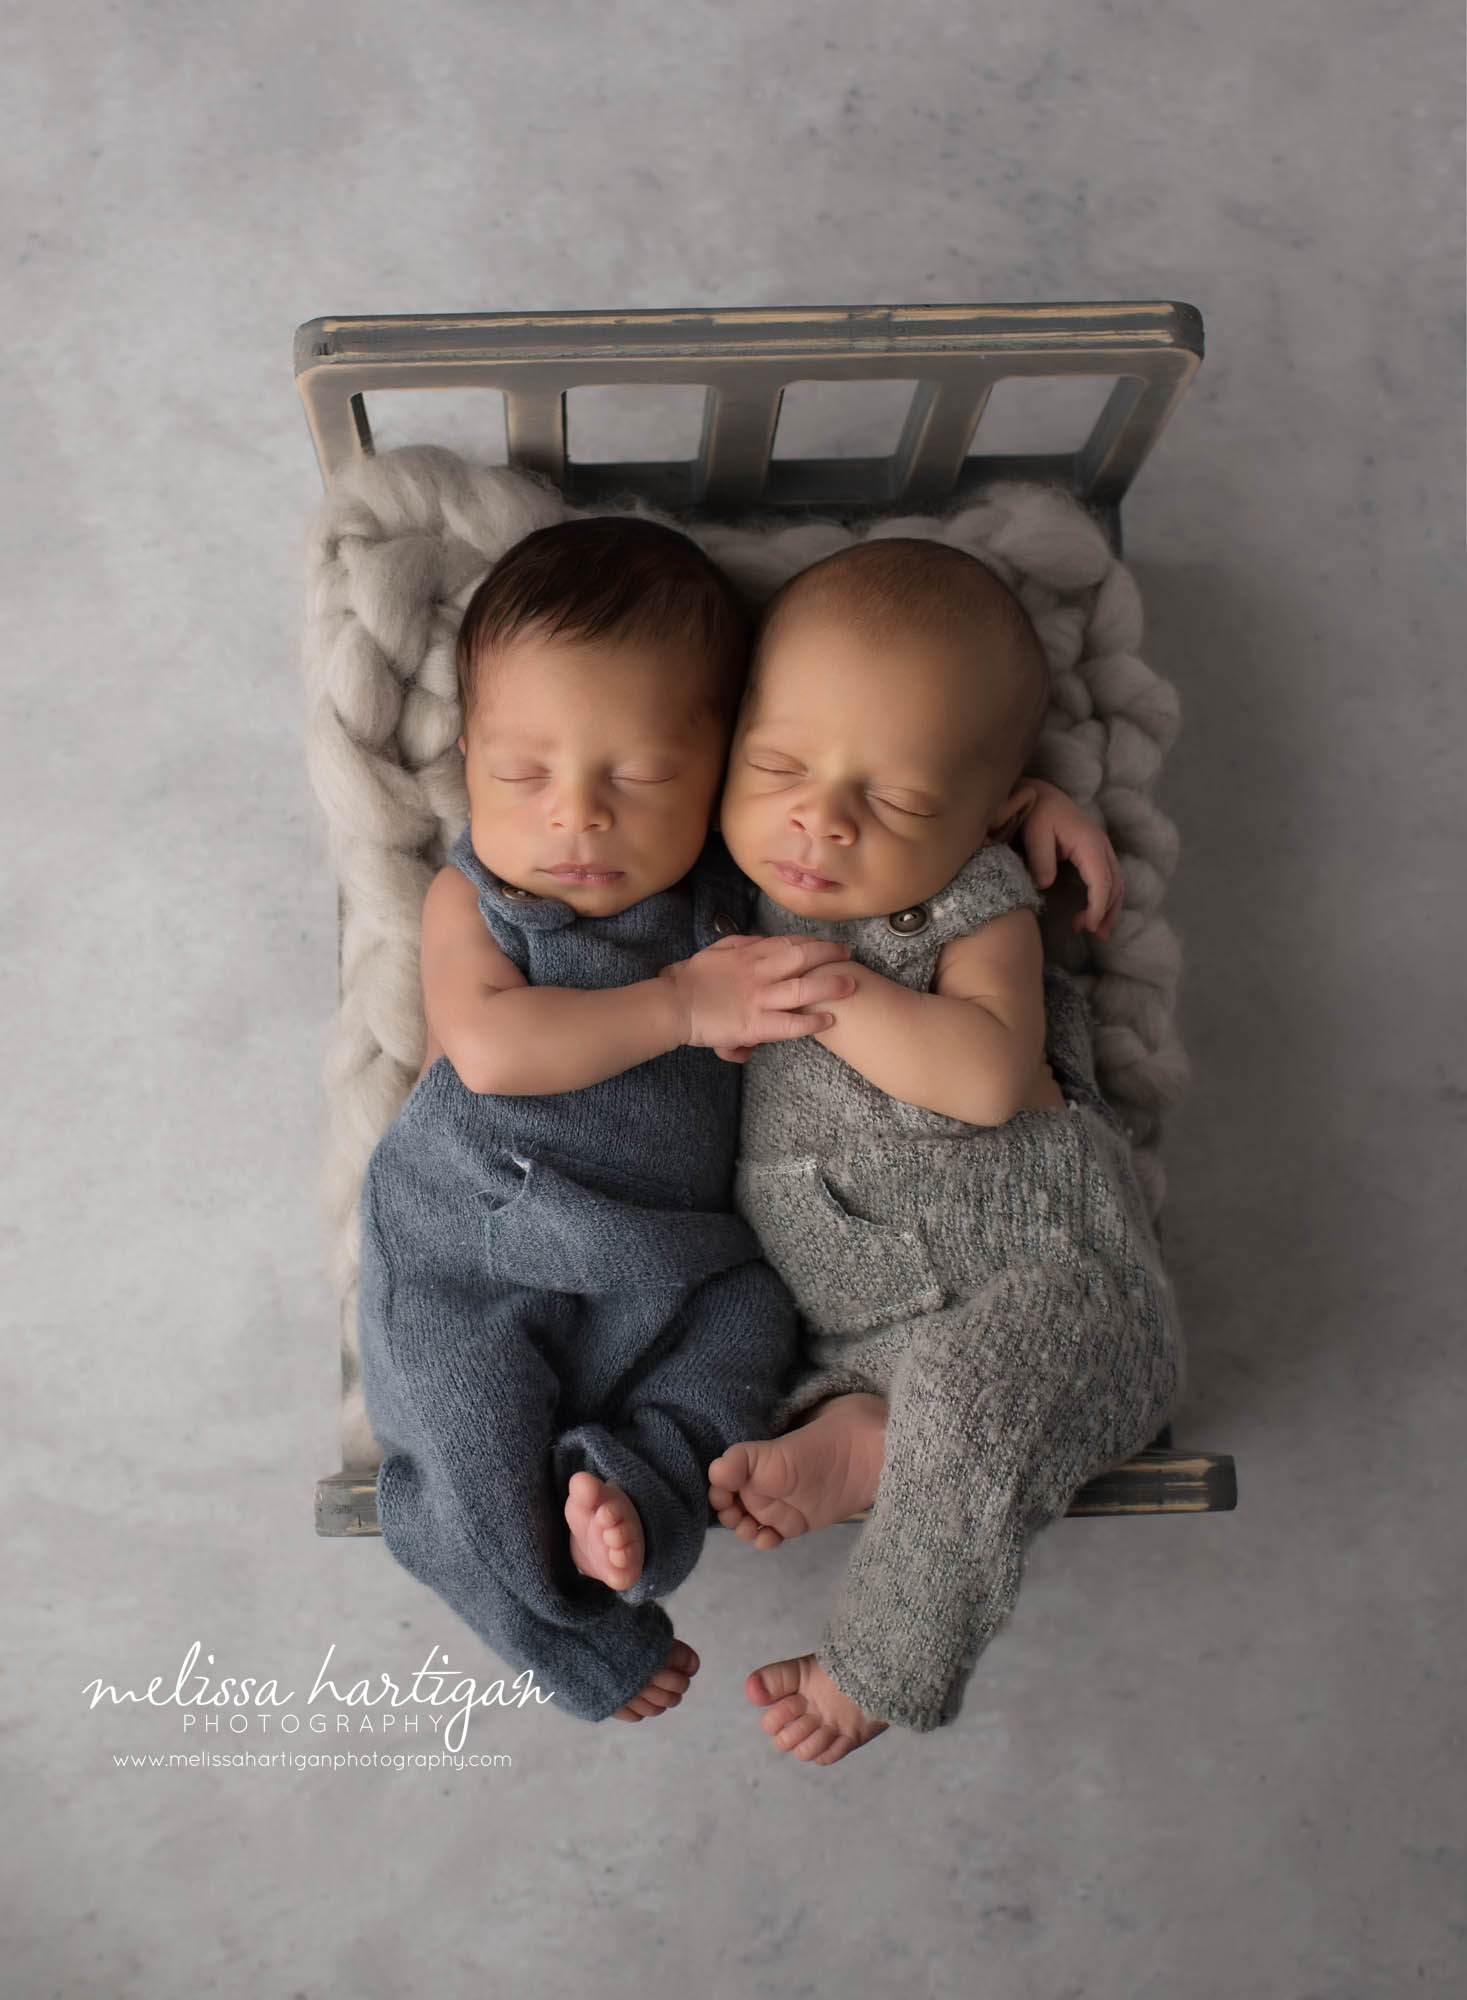 newborn twin boys posed on wooden bed prop wearing blue and gray newborn outfits CT newborn Photography